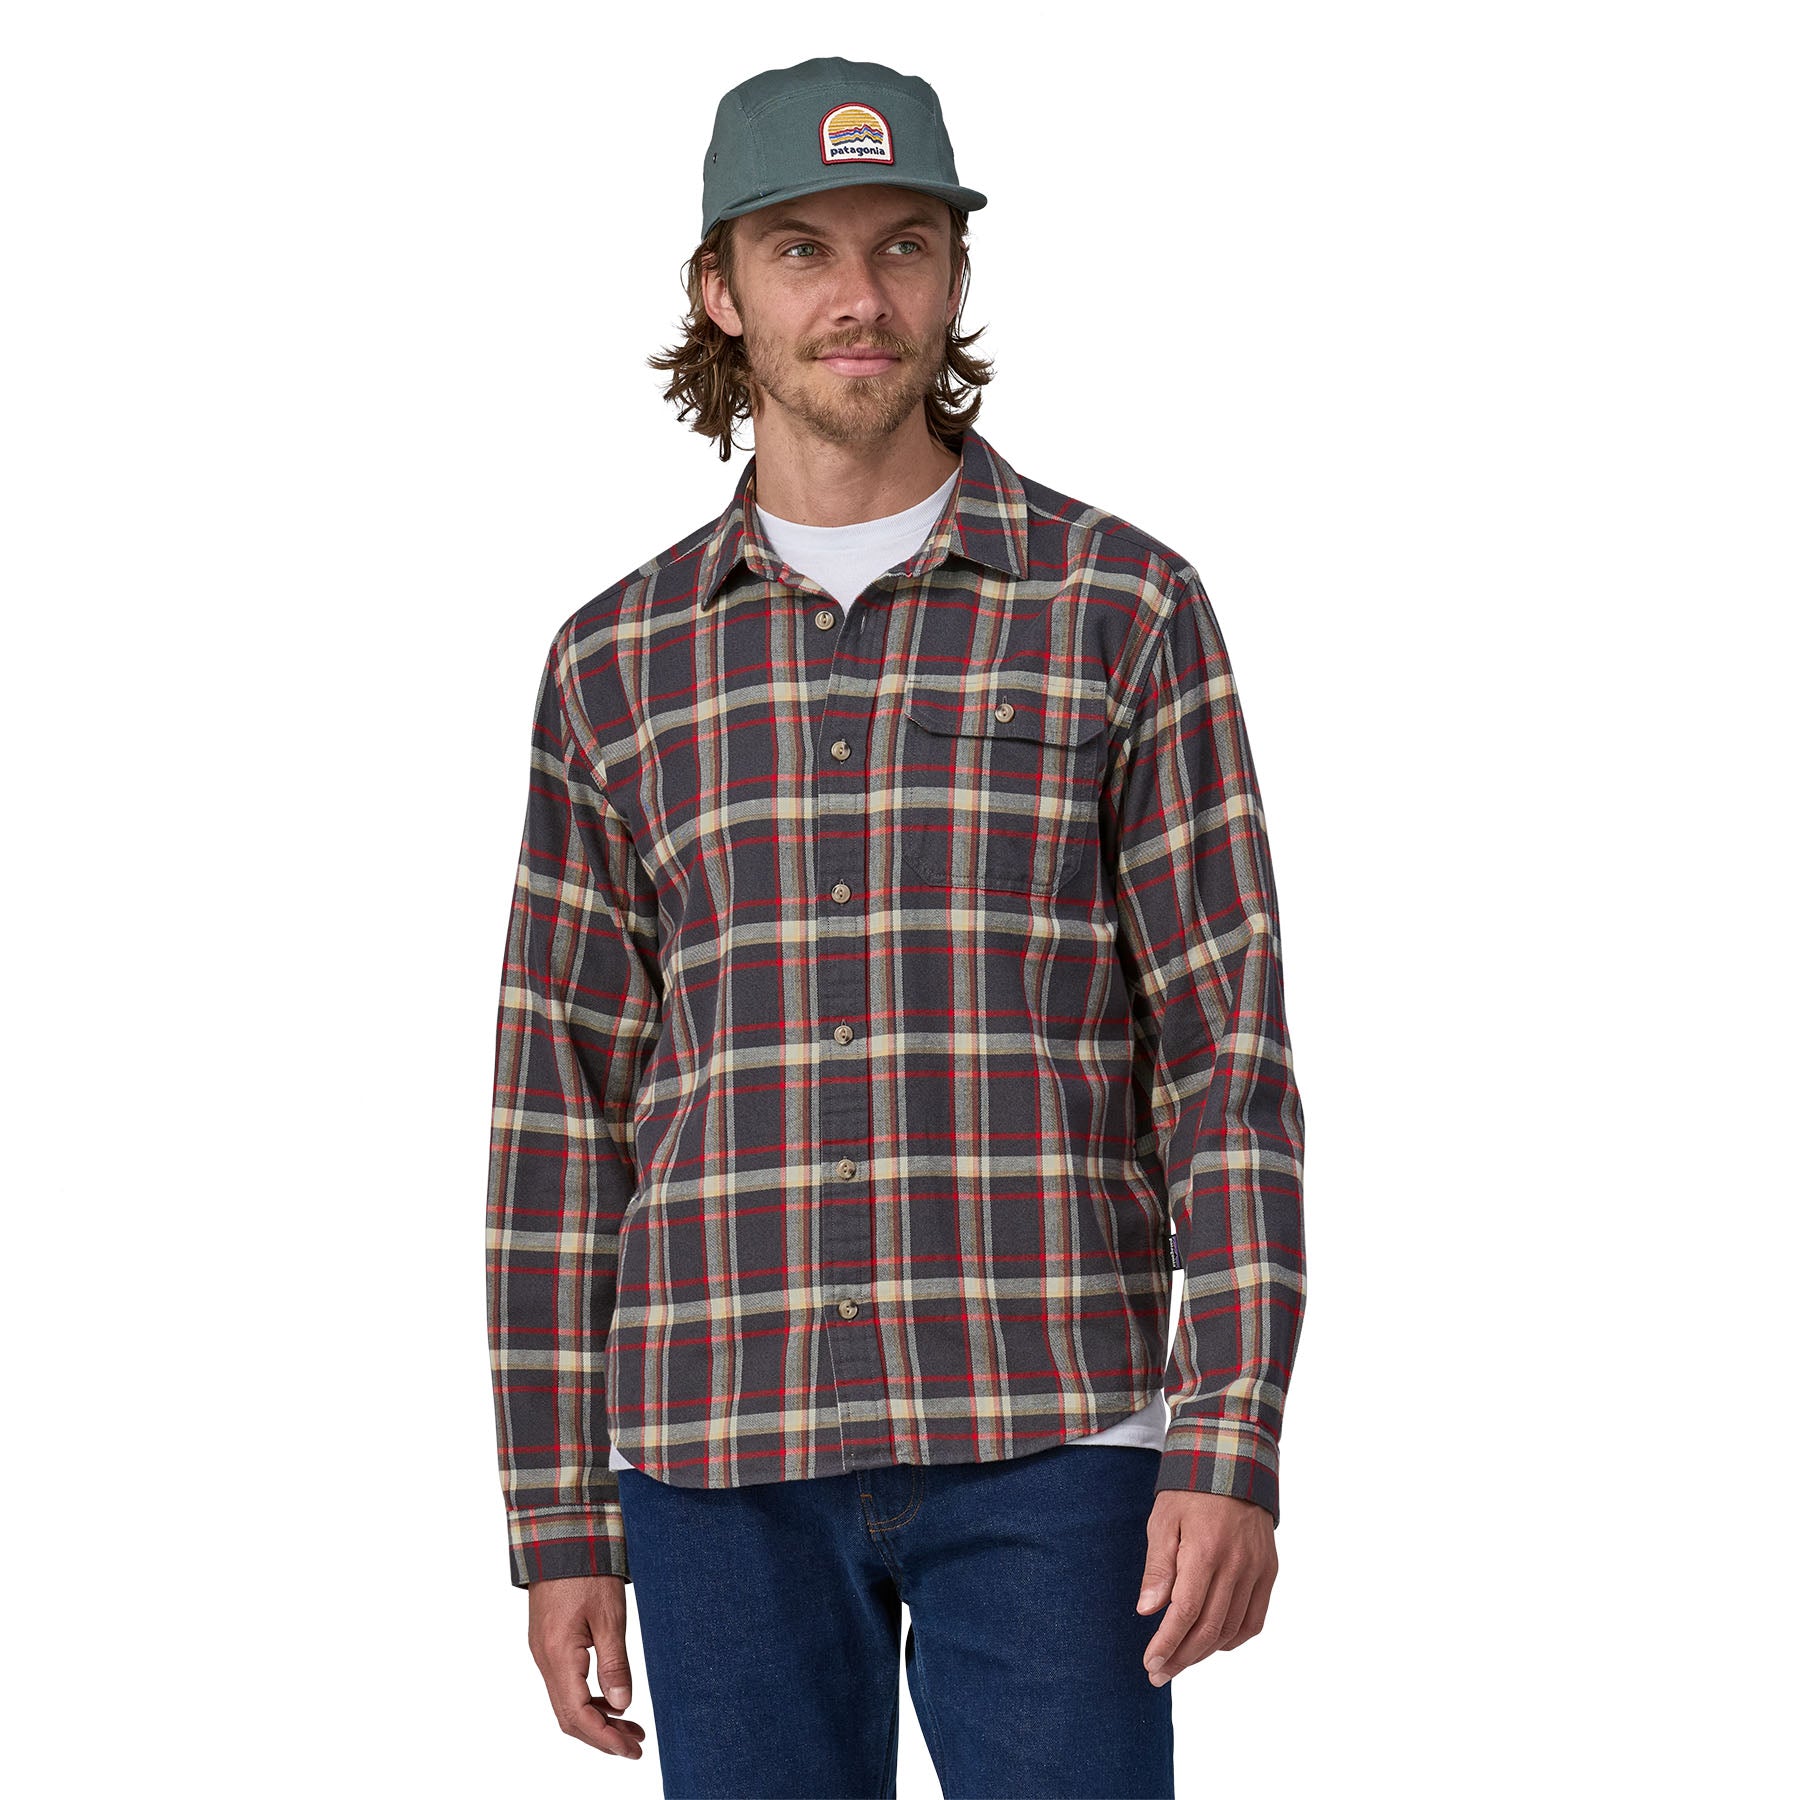 Men's Long-Sleeved Cotton in Conversion Lightweight Fjord Flannel Shirt